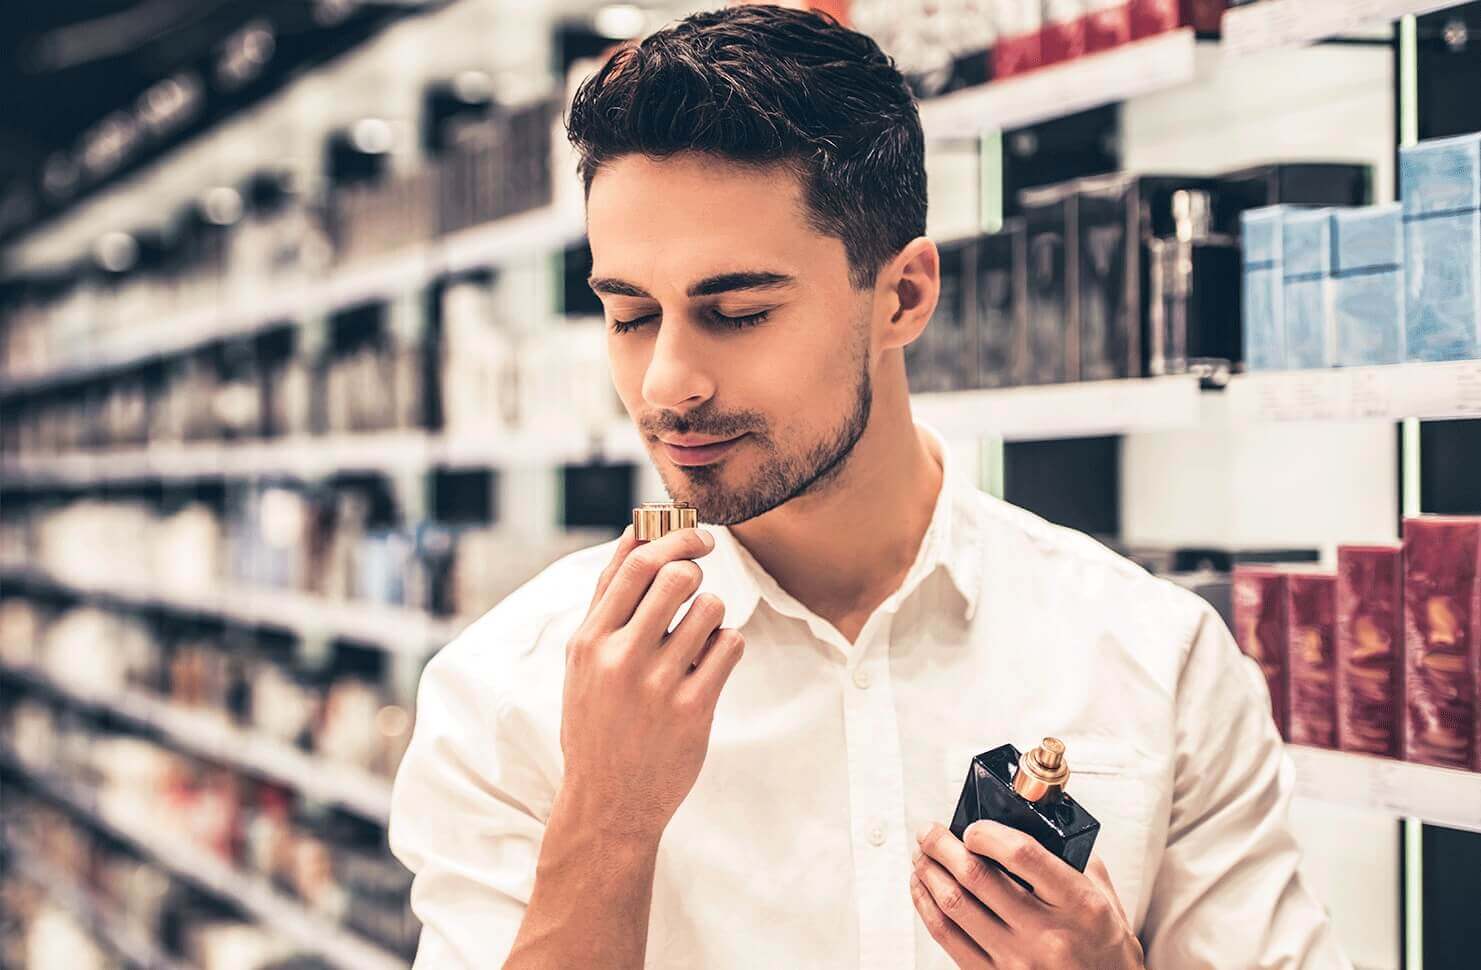 5 Expensive smelling fragrances for summer (that won’t break the bank)